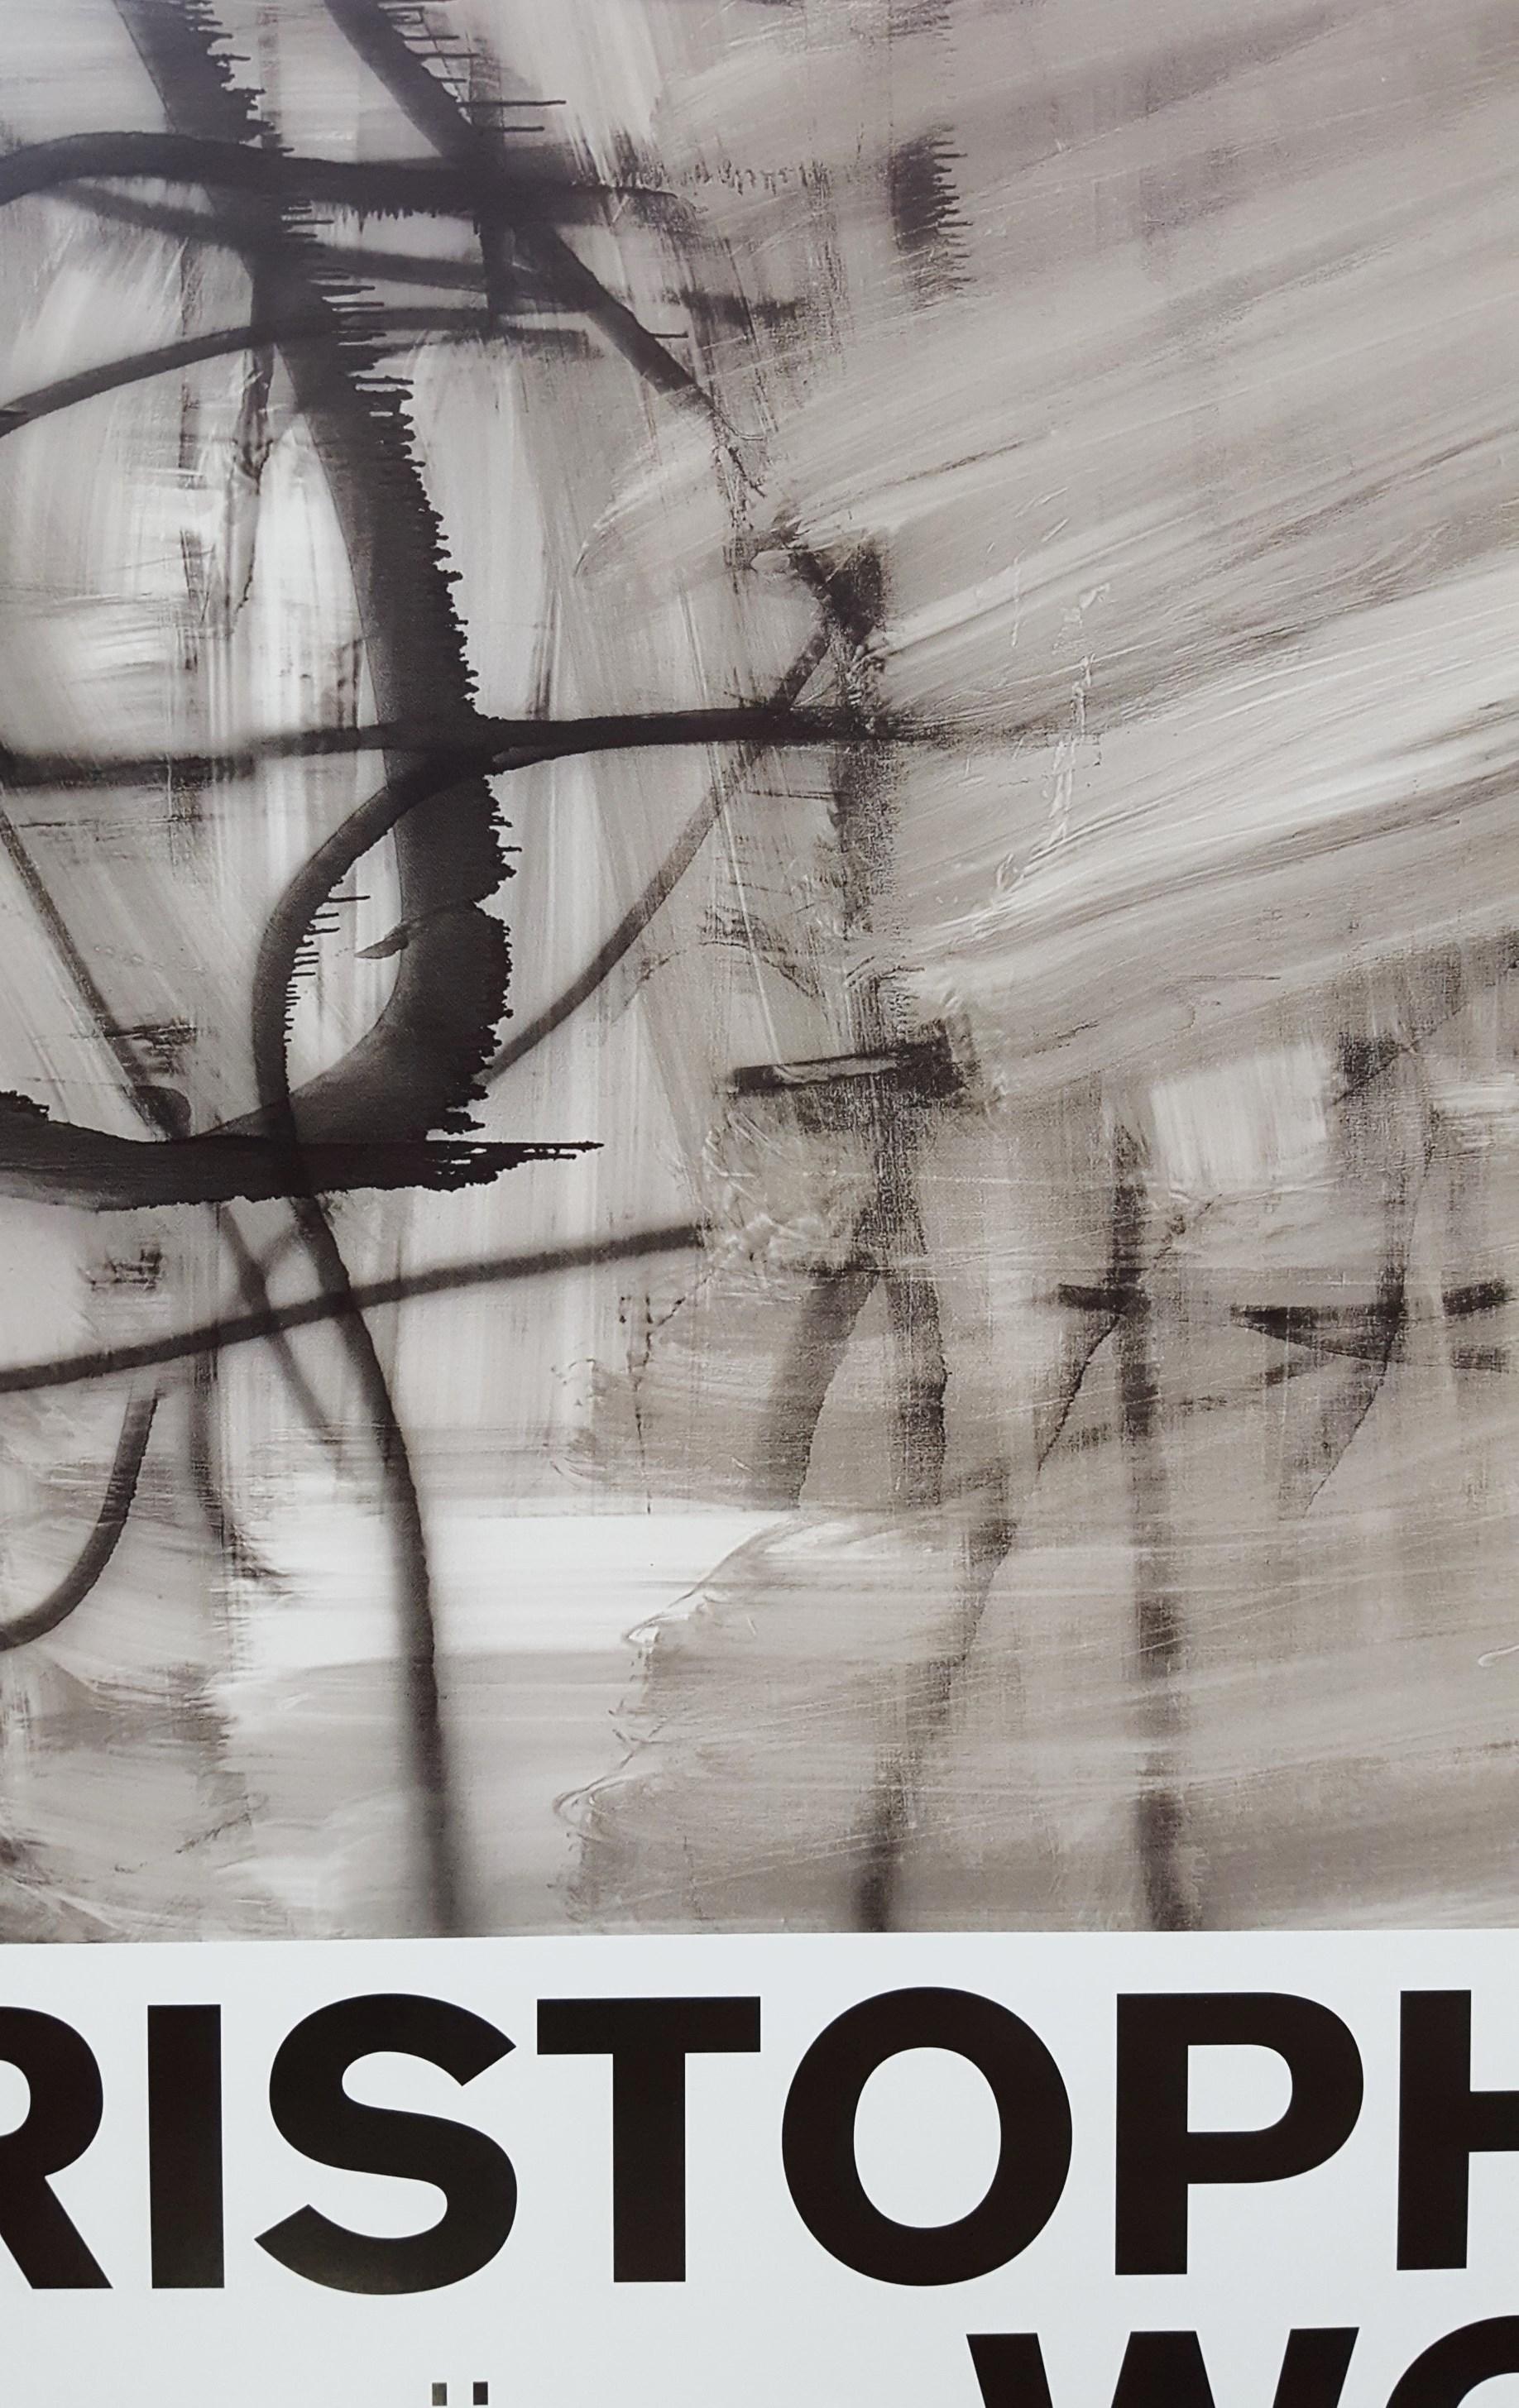 Christopher Wool: Porto - Köln (Signed) - Gray Abstract Print by (after) Christopher Wool